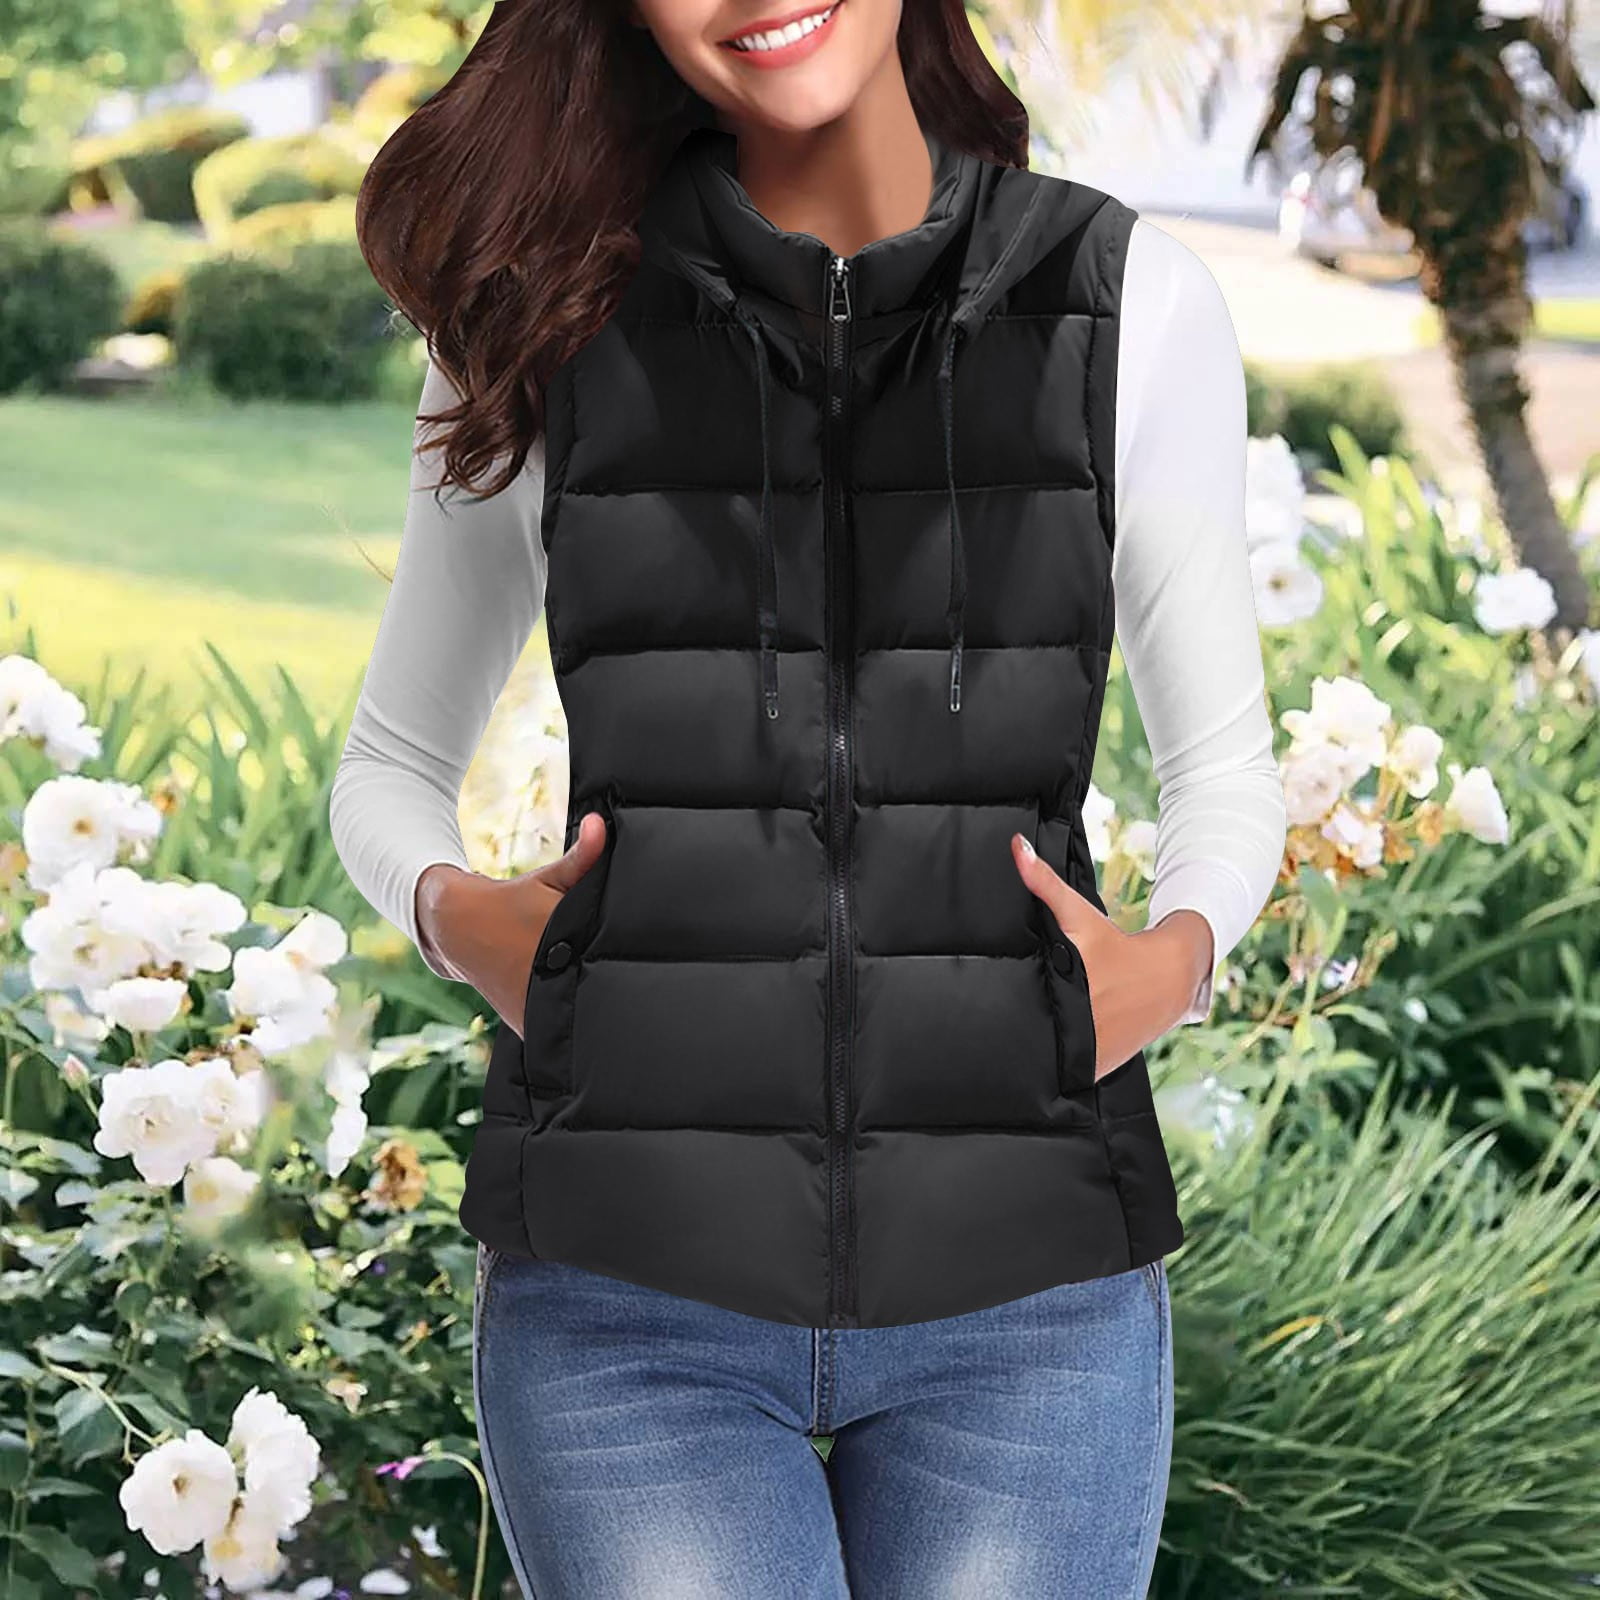 CAICJ98 Puffer Vest Women Women's Puffer Vest Casual Stand Collar Quilted  Waistcoat Outdoor Padded Ski Vest Black,XL